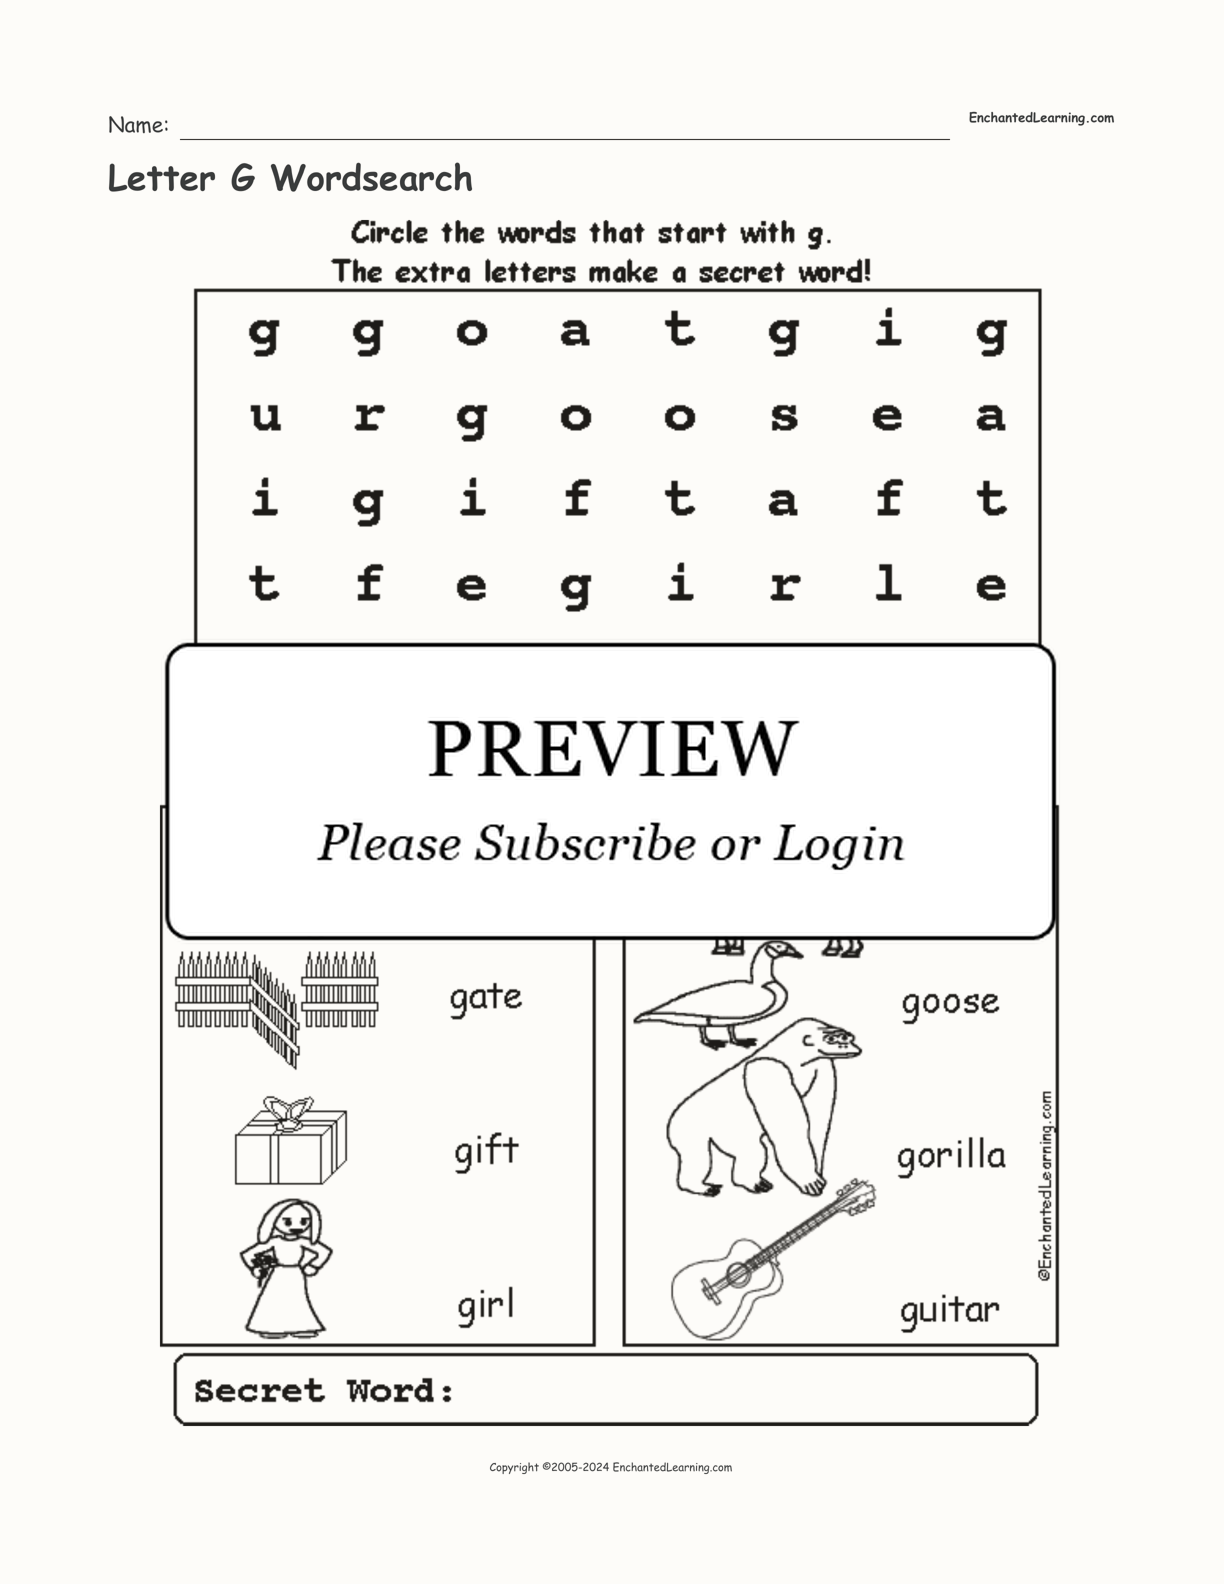 Letter G Wordsearch interactive worksheet page 1